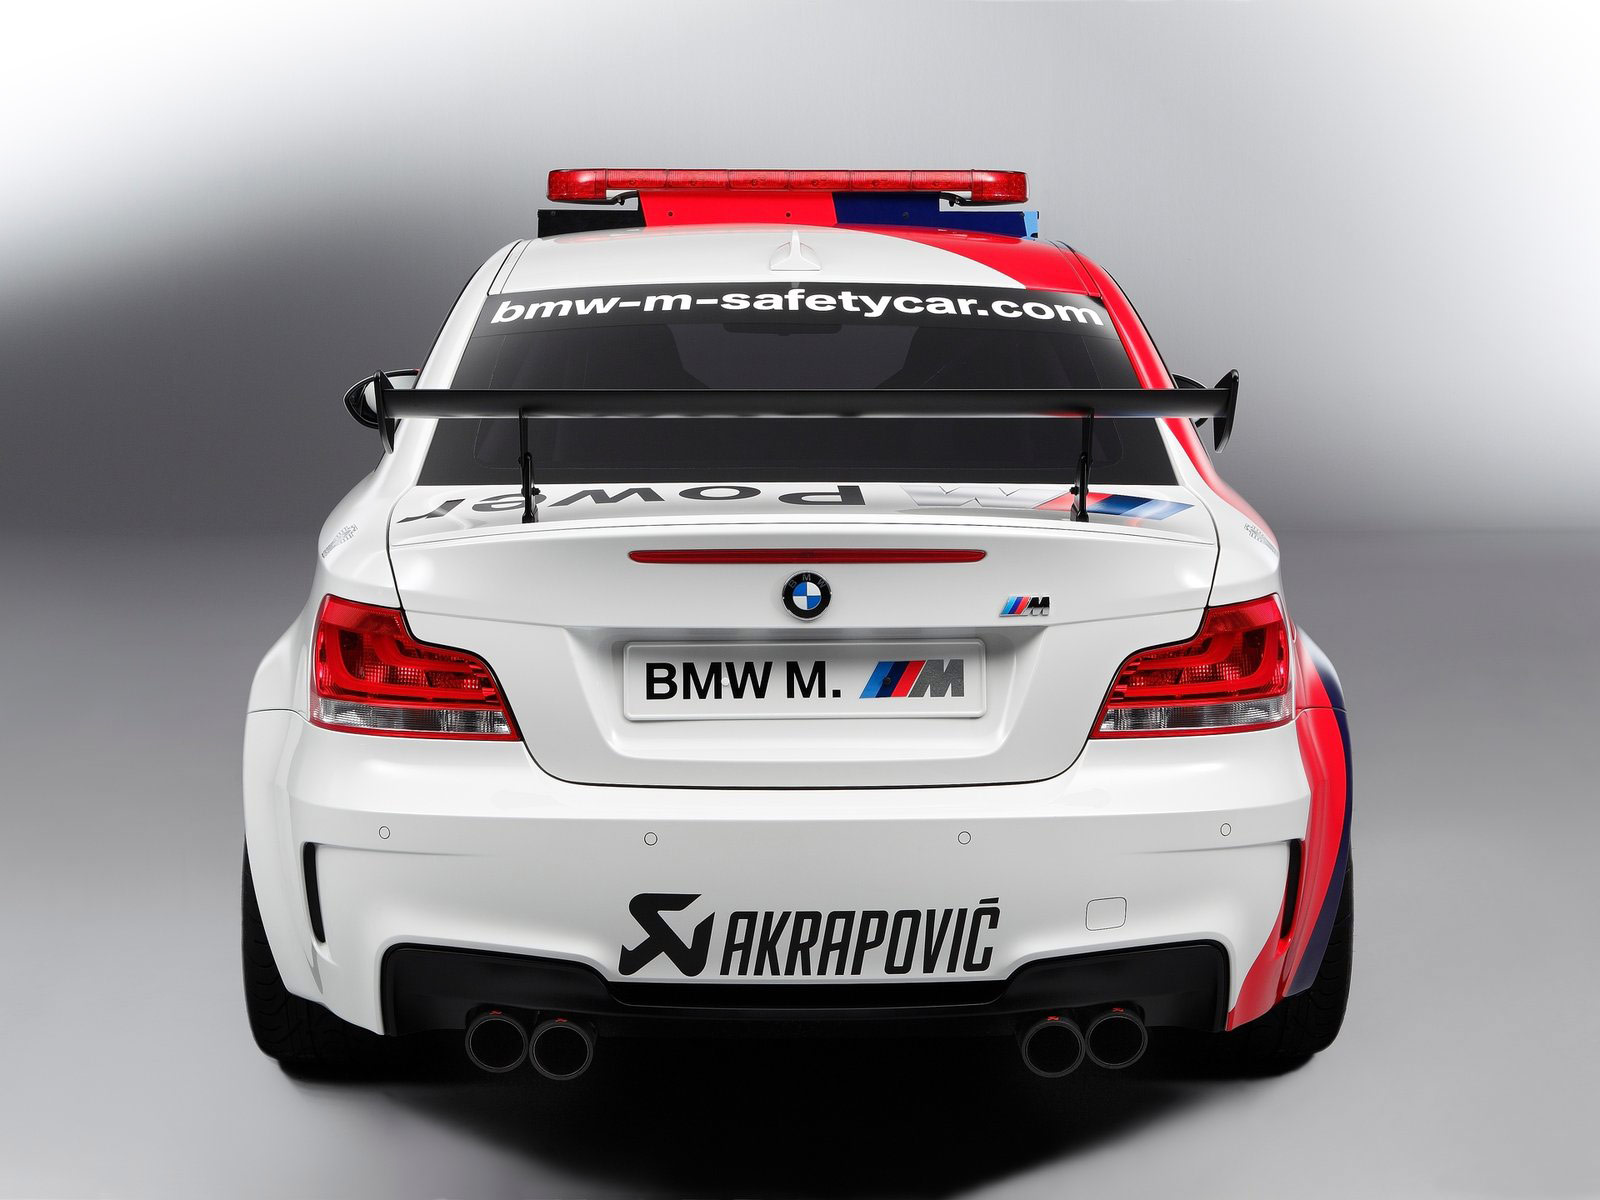 The Ultimate Track Ready Car: The 2011 BMW 1 Series M Coupe MotoGP Safety Car